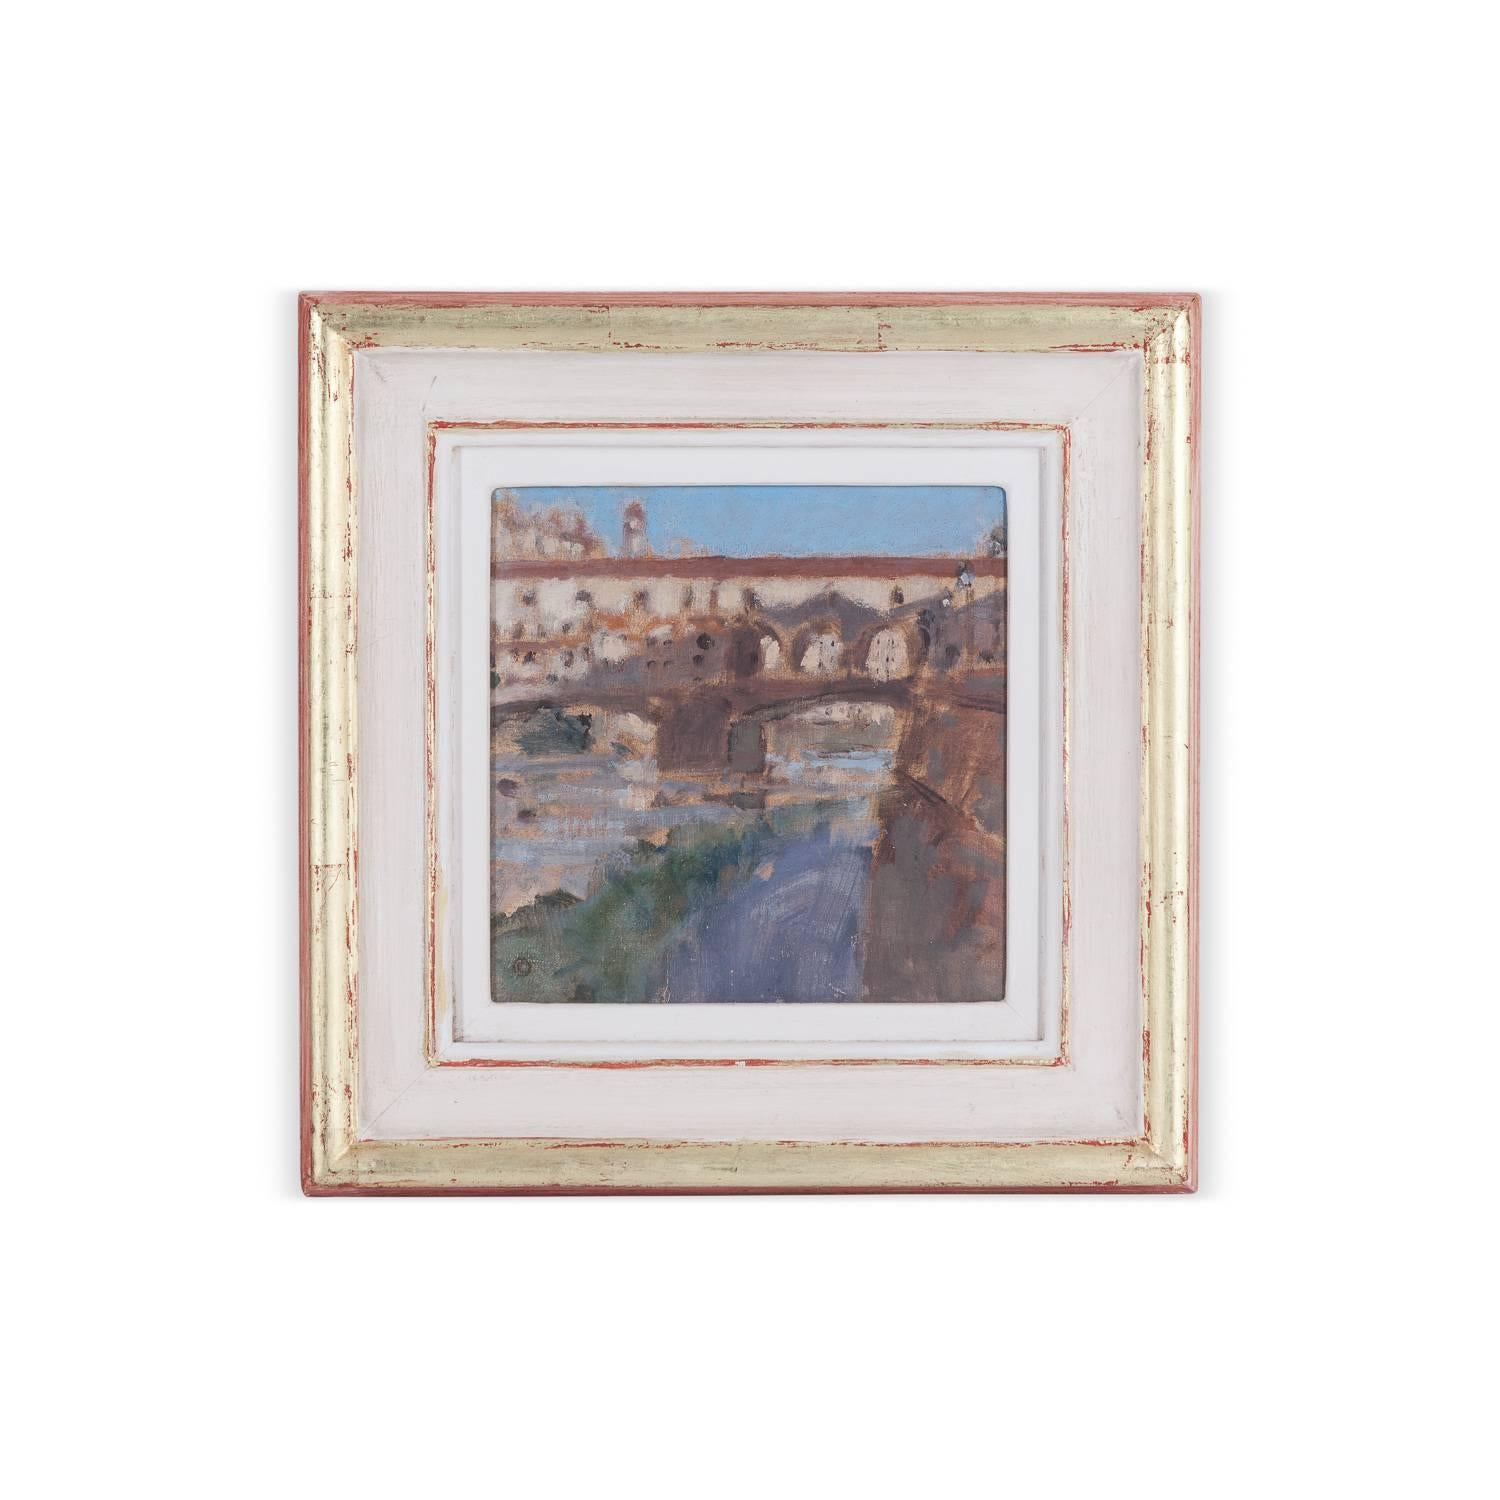 Colne Orchard Landscape Painting - Ponte Vecchio by Colin Orchard. Oil on Board